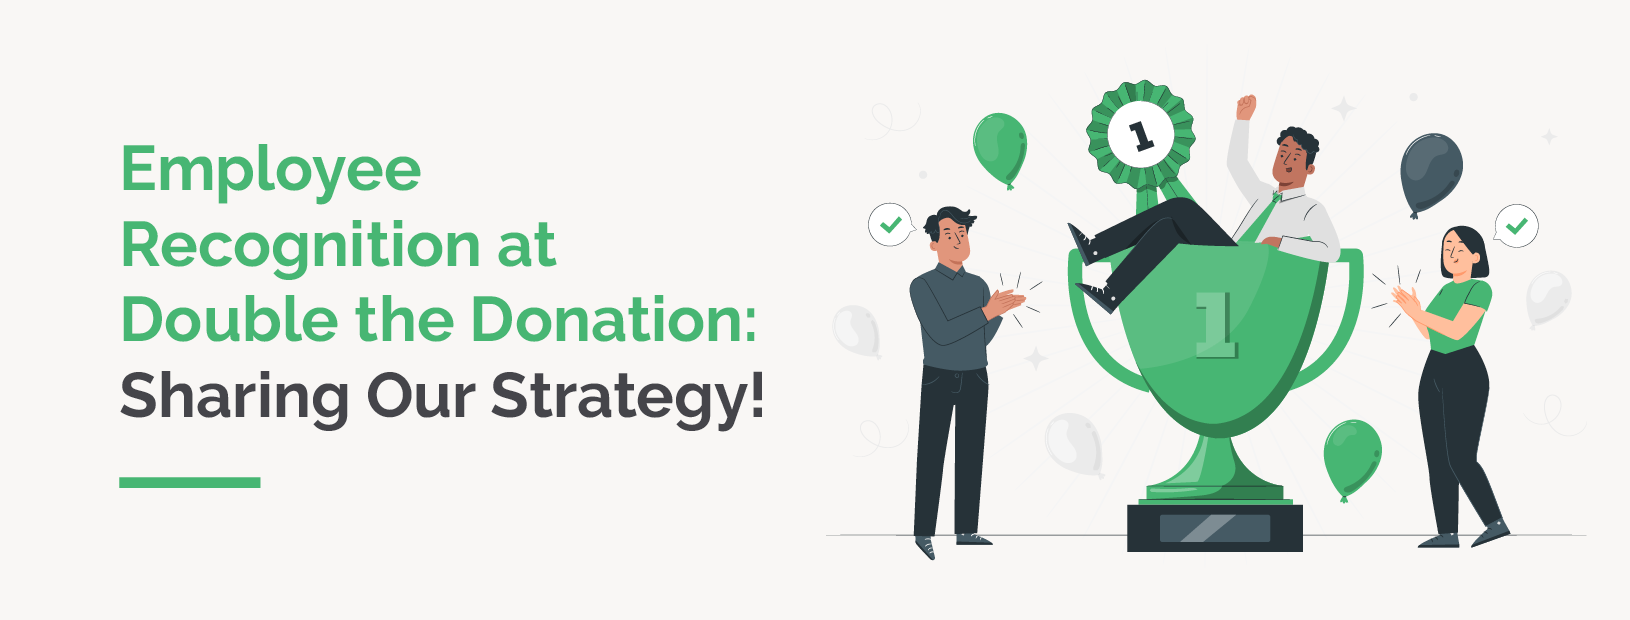 This article explore Double the Donation's unique peer-to-peer recognition strategy.